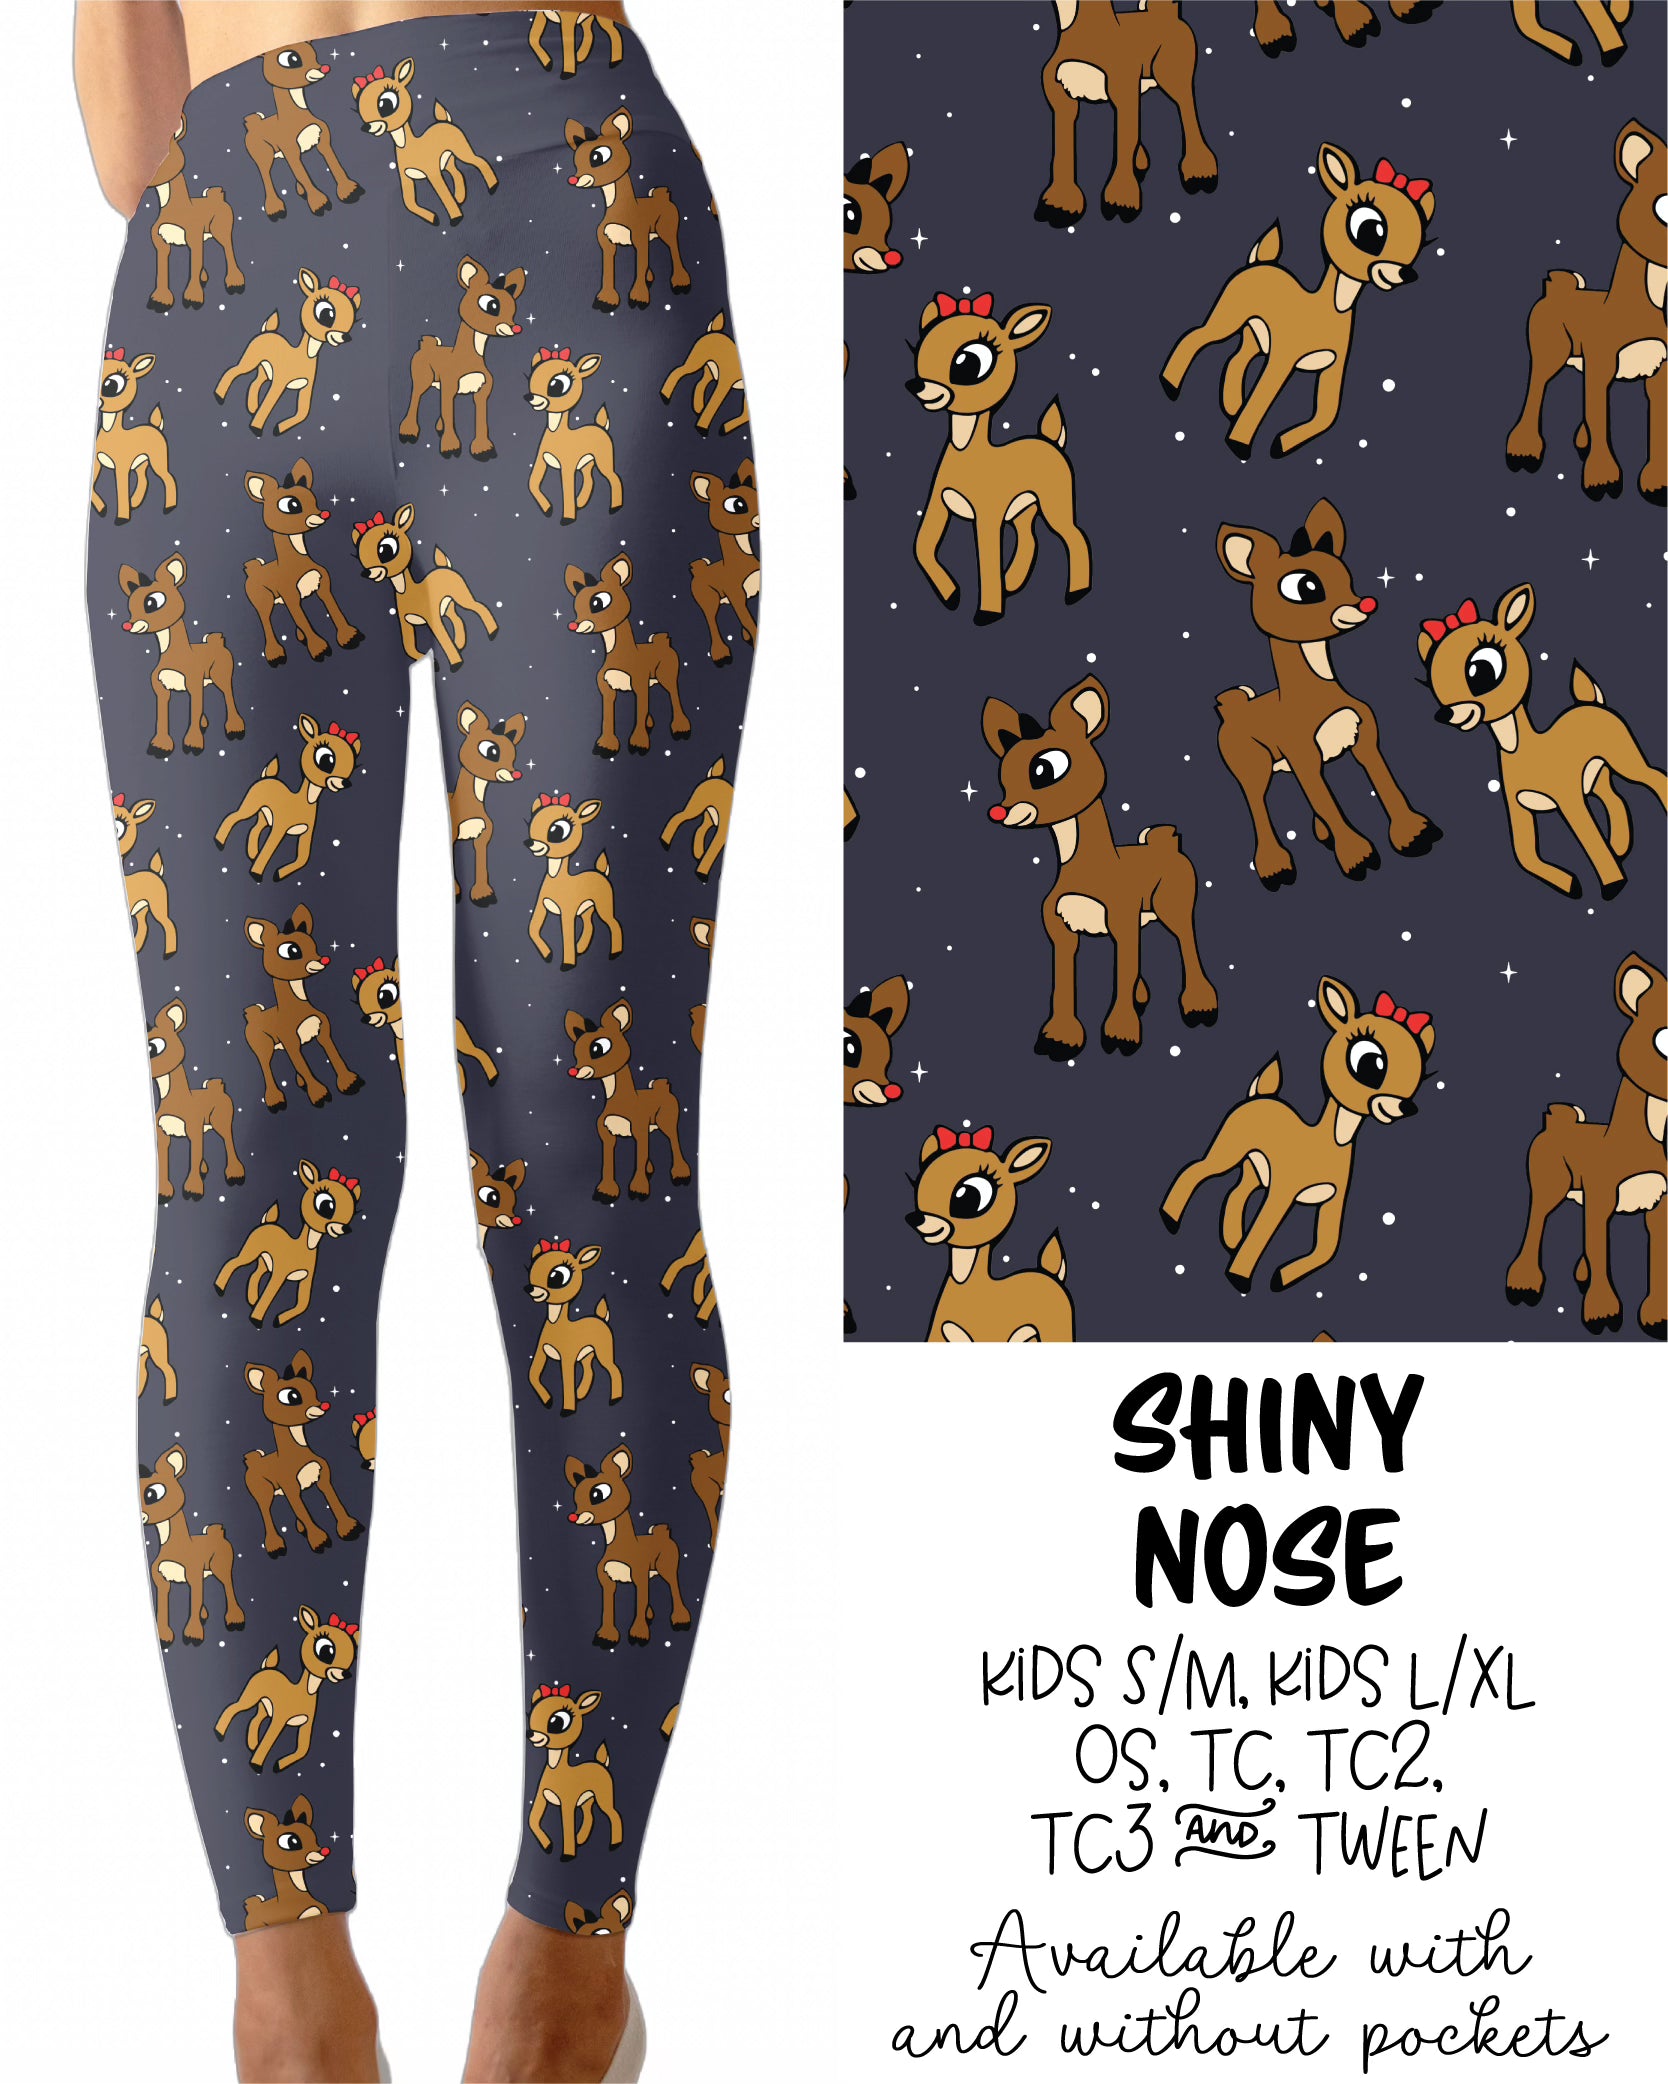 Shiny Nose Leggings Full Length With and Without Pockets